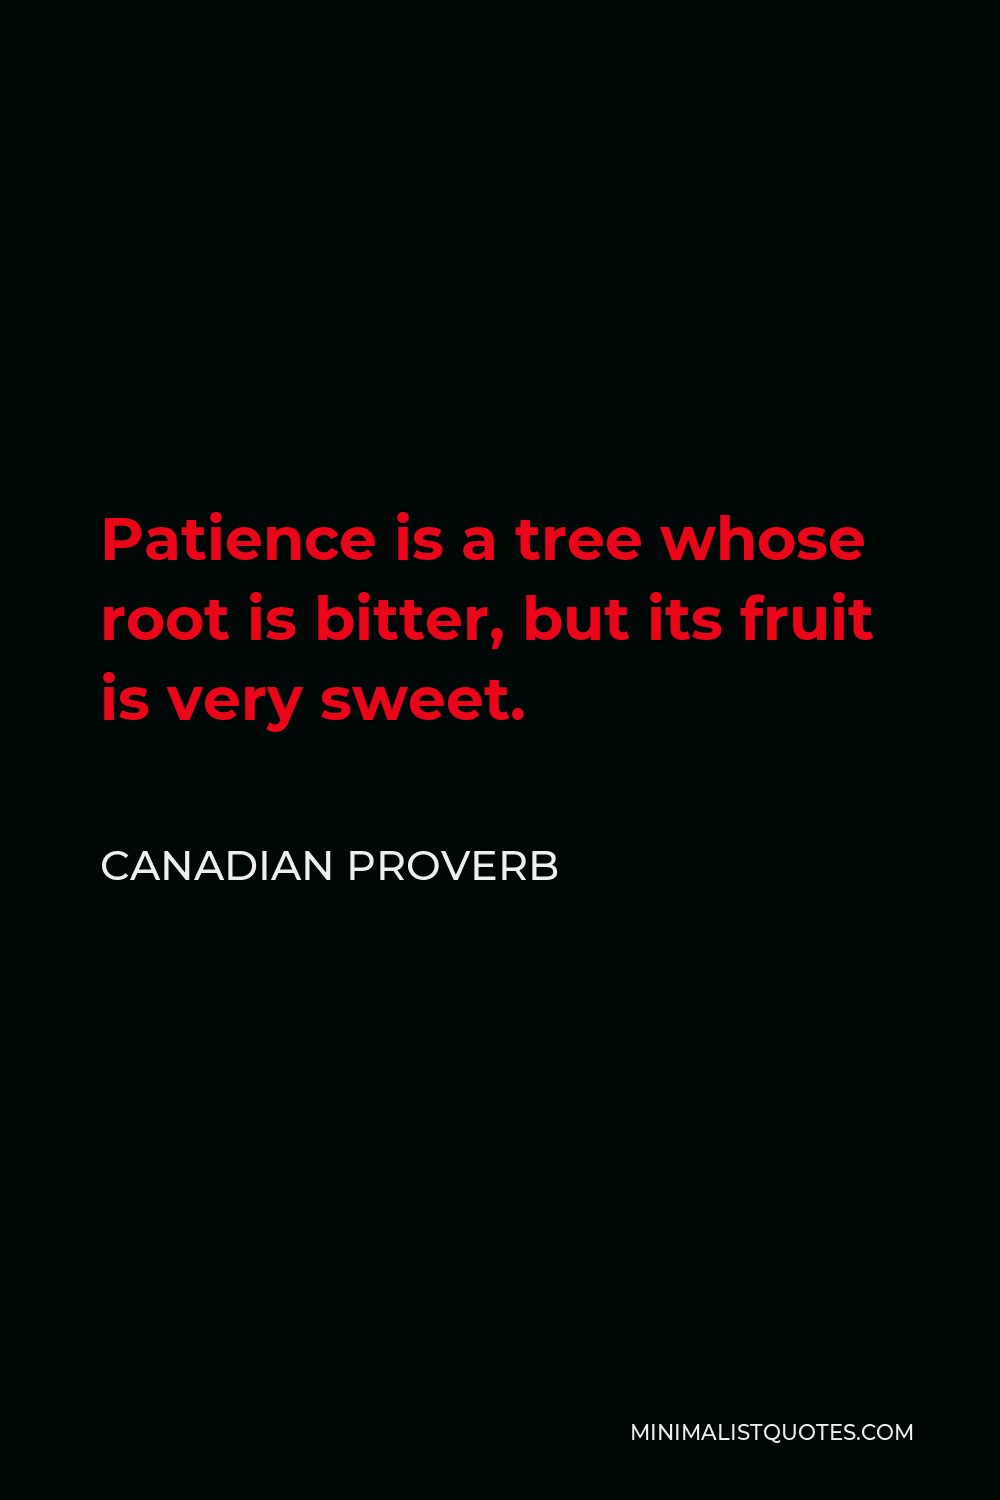 Canadian Proverb Quote - Patience is a tree whose root is bitter, but its fruit is very sweet.